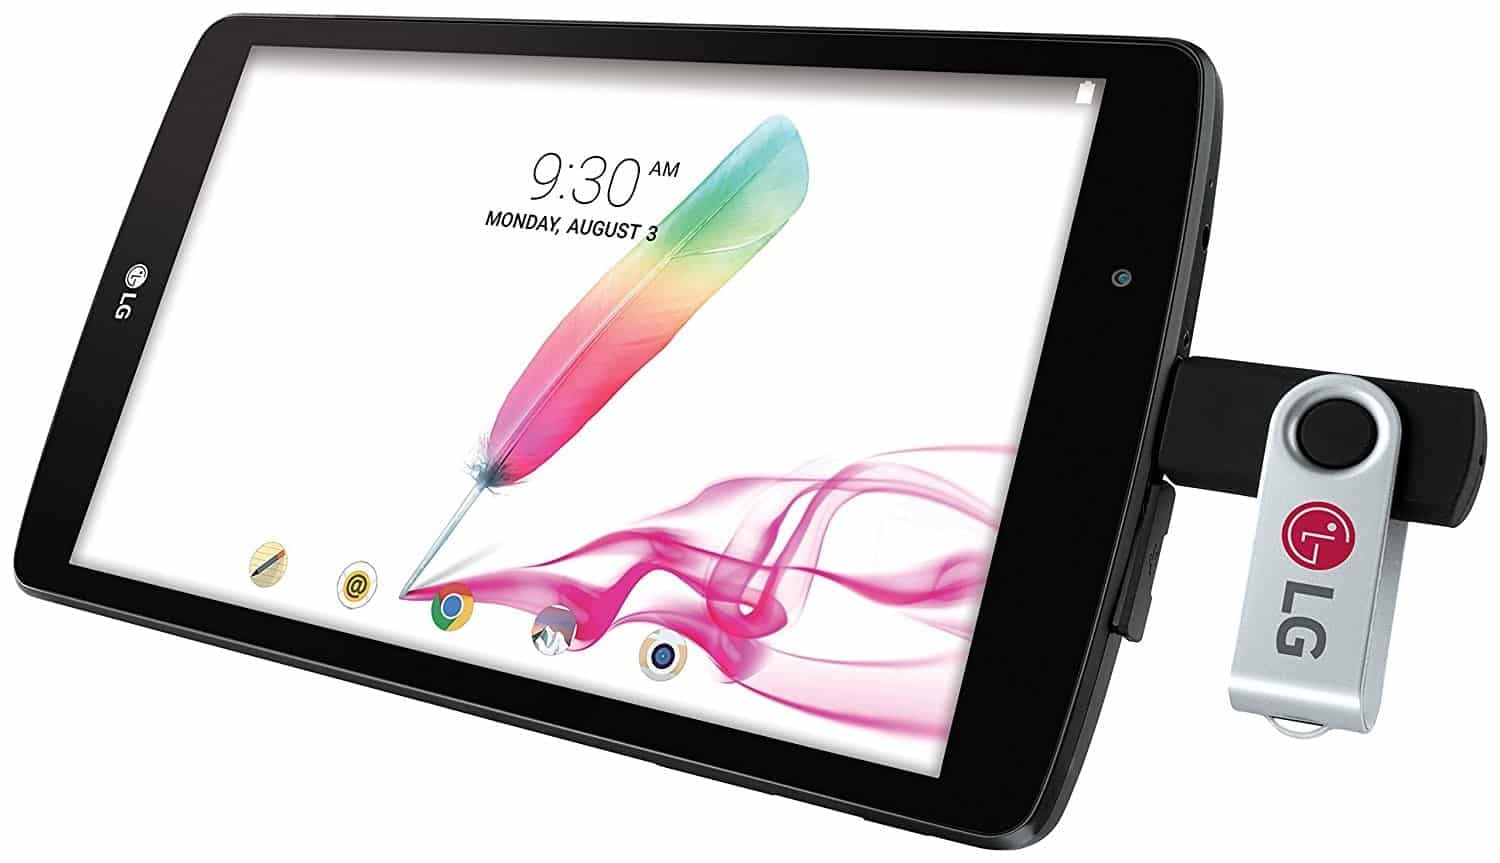 Top 7 Tablets With USB Port You Can Buy in 2020